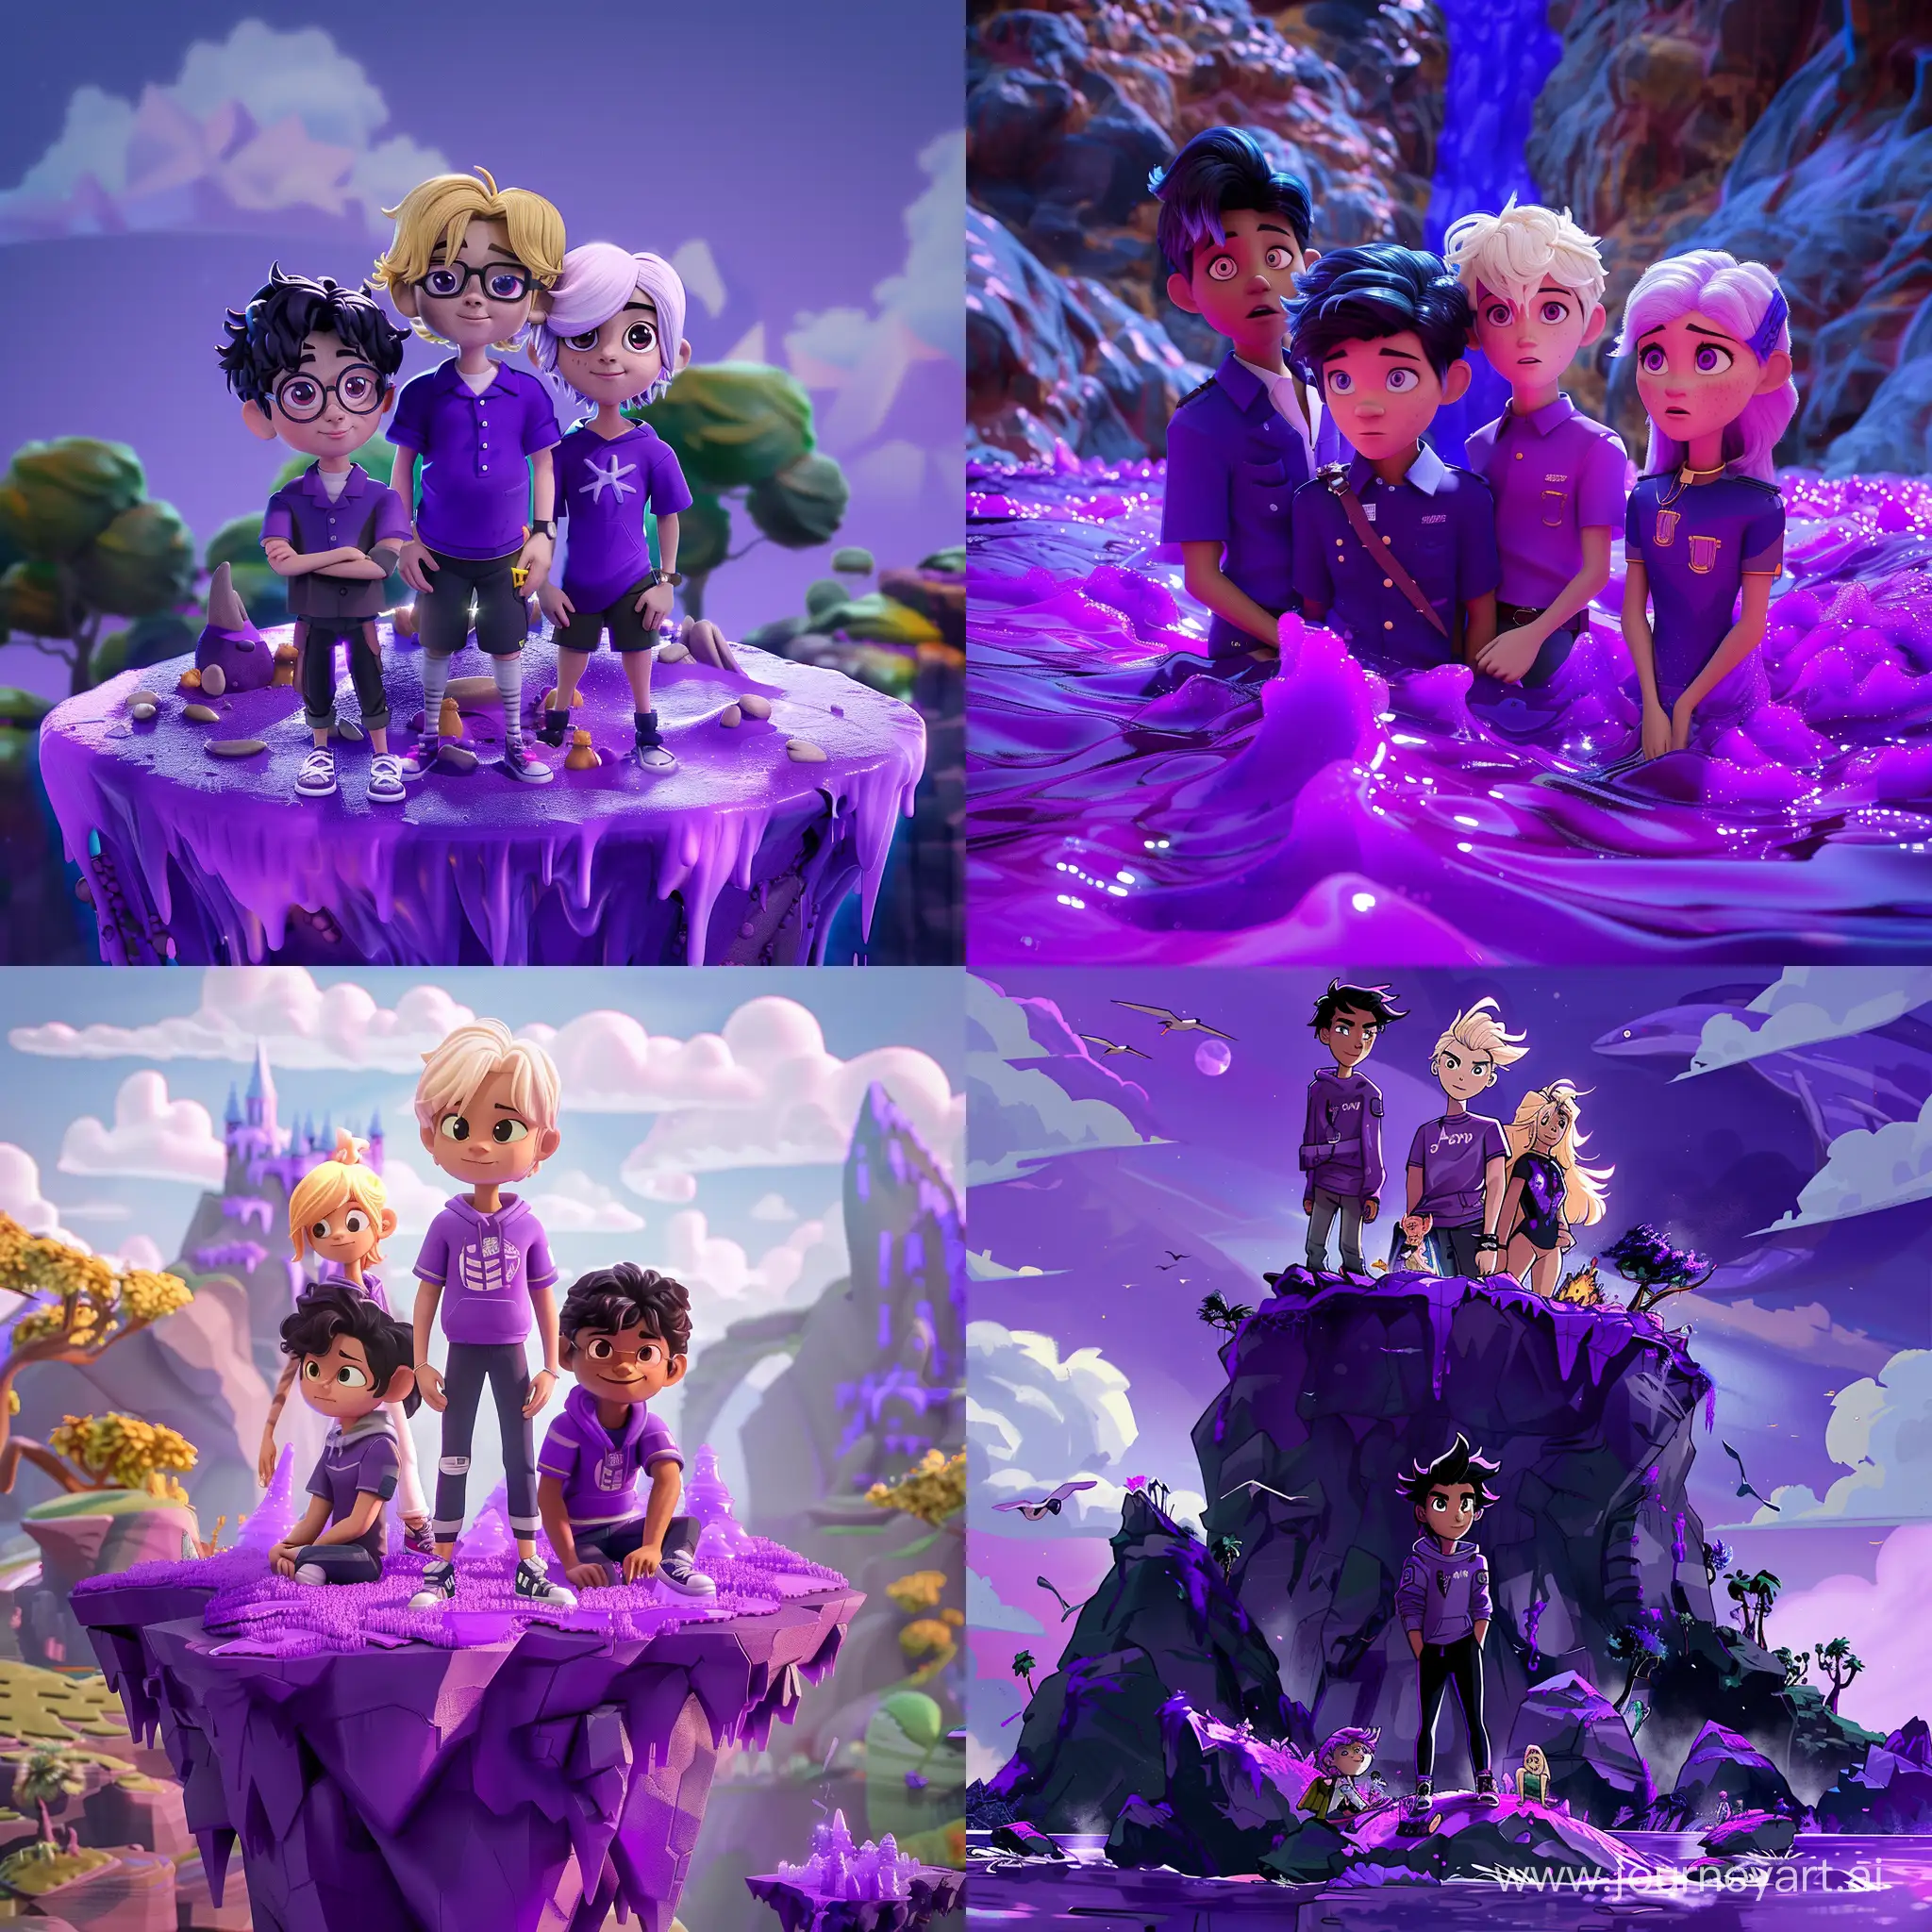 purple island, everything is purple, purple theme, mysterious, teenagers, teens, two black haired boys, one blonde haired boy, one blonde haired girl, one black haired girl, animated style